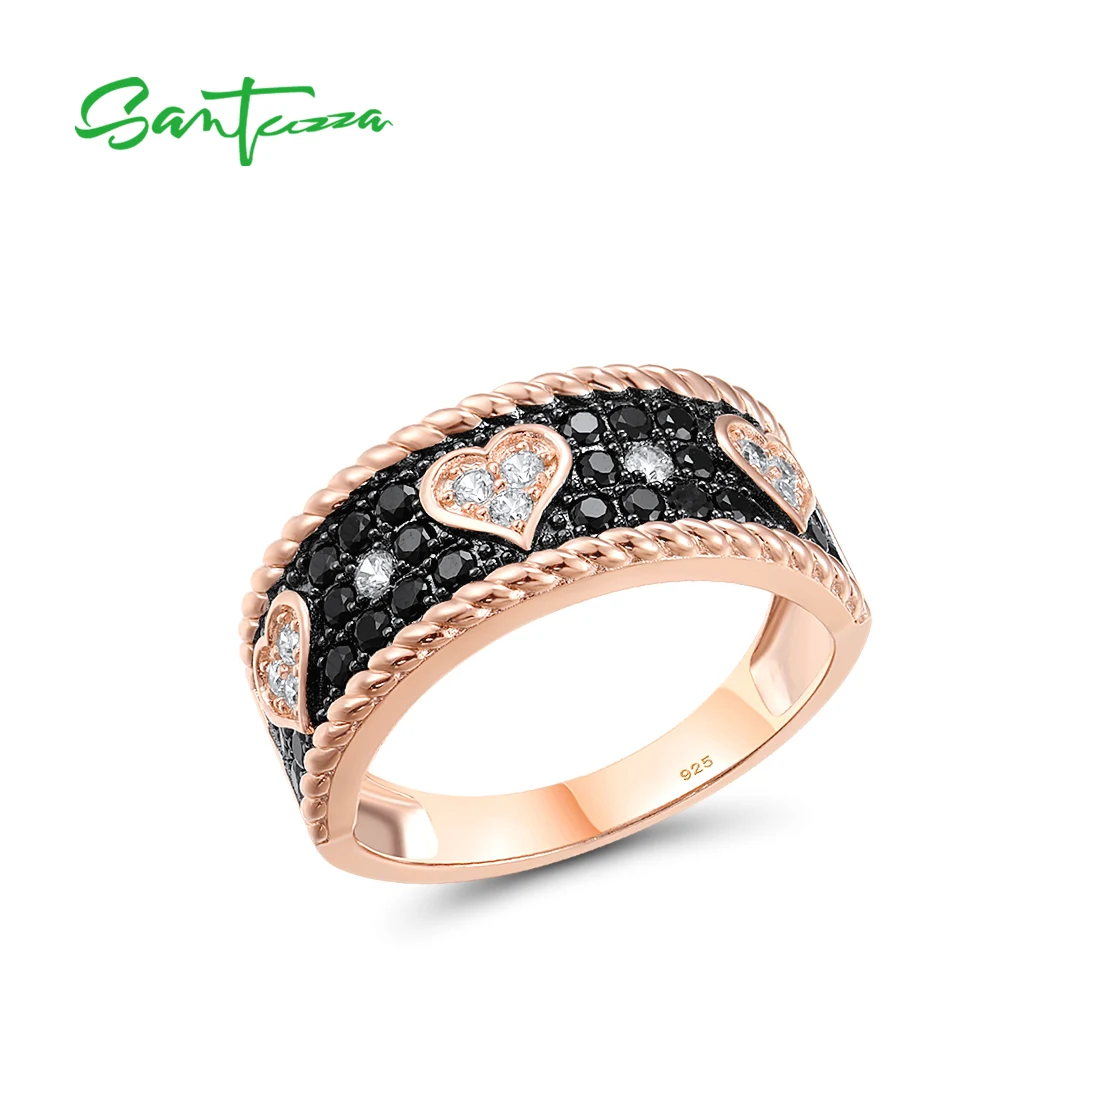 

SANTUZZA Pure 925 Sterling Silver Ring For Women Sparkling Black Spinel White CZ Rose Heart Antique Look Fine Elegant Jewelry